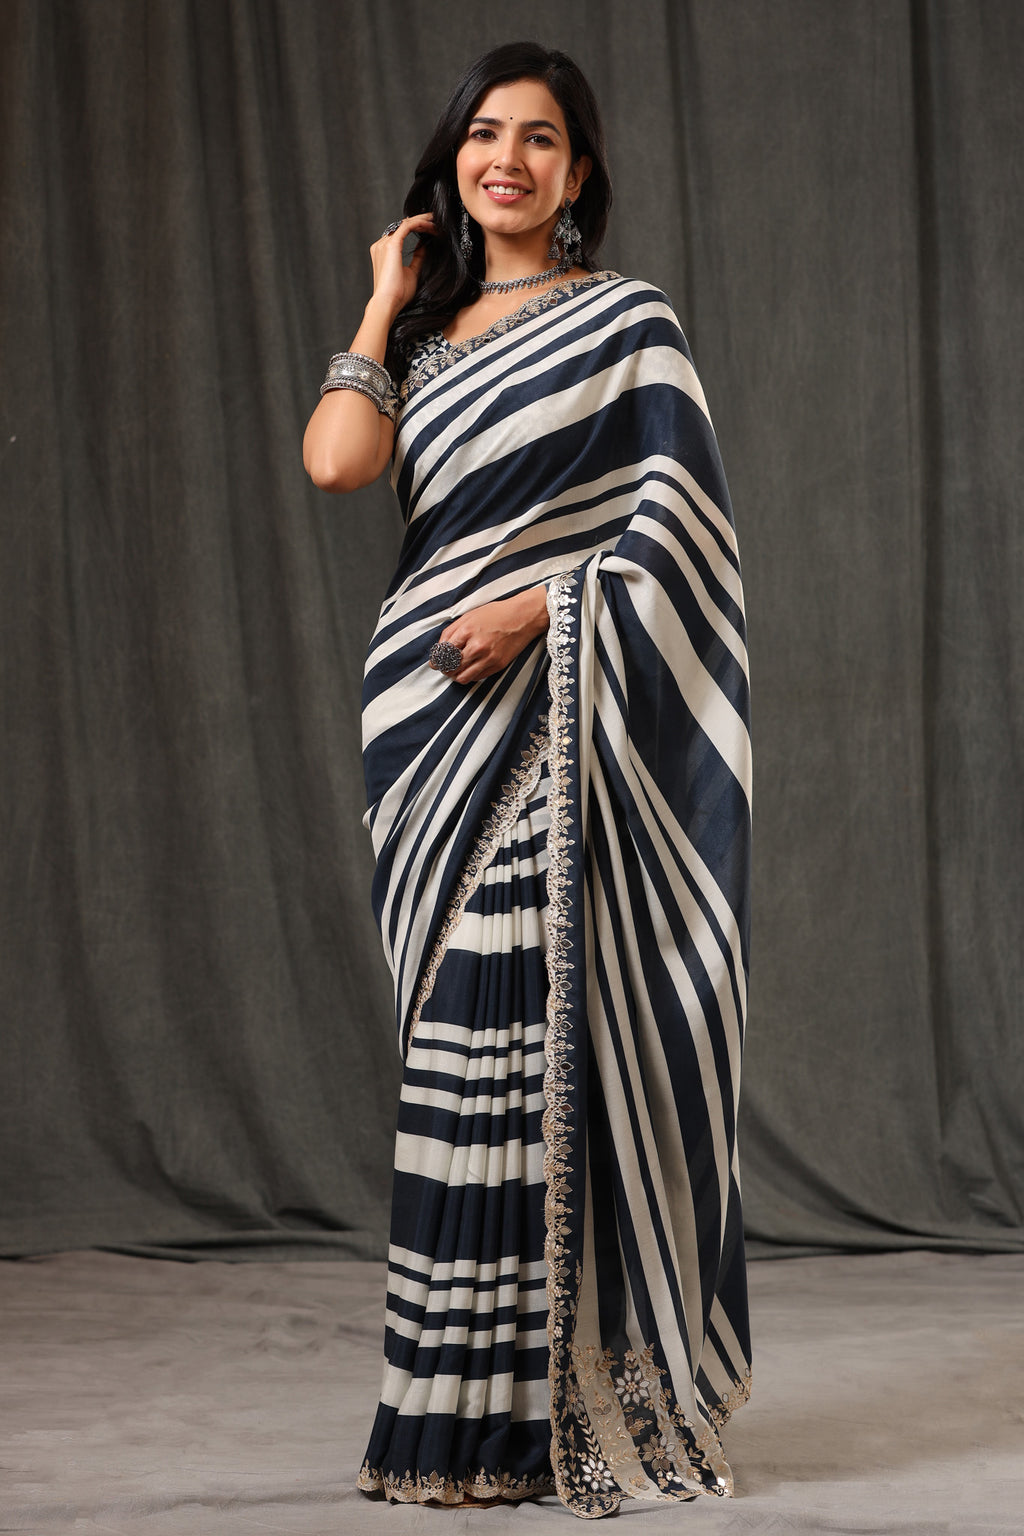 Buy stunning black and white stripes crepe georgette sari online in USA with saree blouse. Look classy at weddings and special occasions in exquisite designer sarees, embroidered sarees, party sarees, handwoven saris, pure silk sarees, Banarasi sarees, Kanjivaram sarees from Pure Elegance Indian saree store in USA.-full view